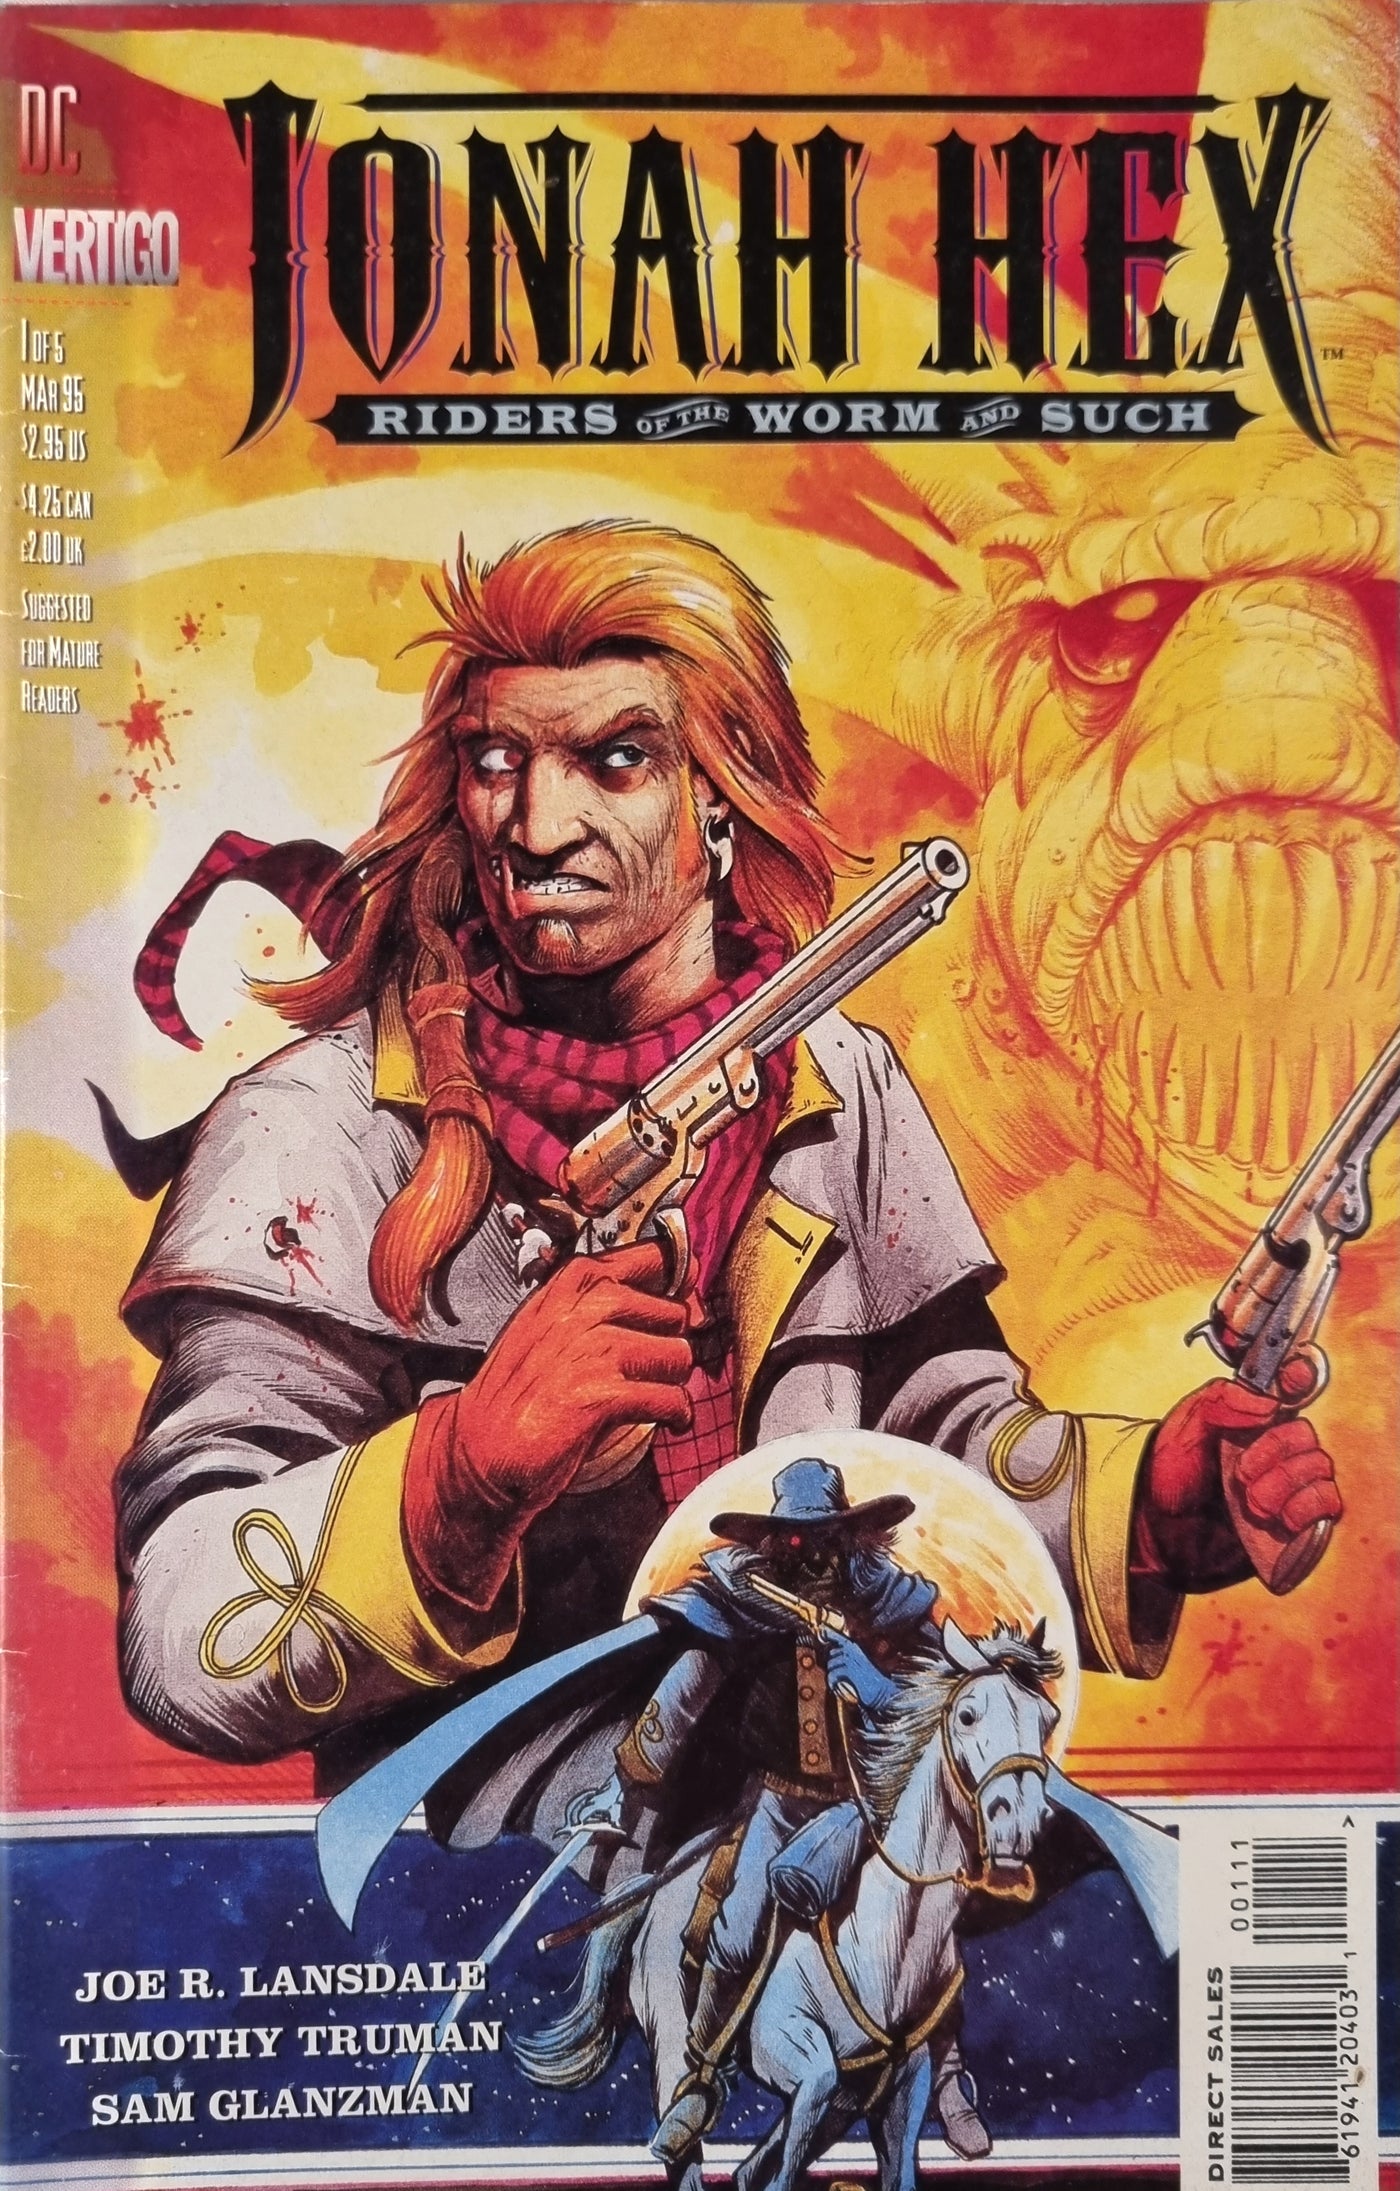 Jonah Hex: Riders of the Worm and Such #1 (of 5)